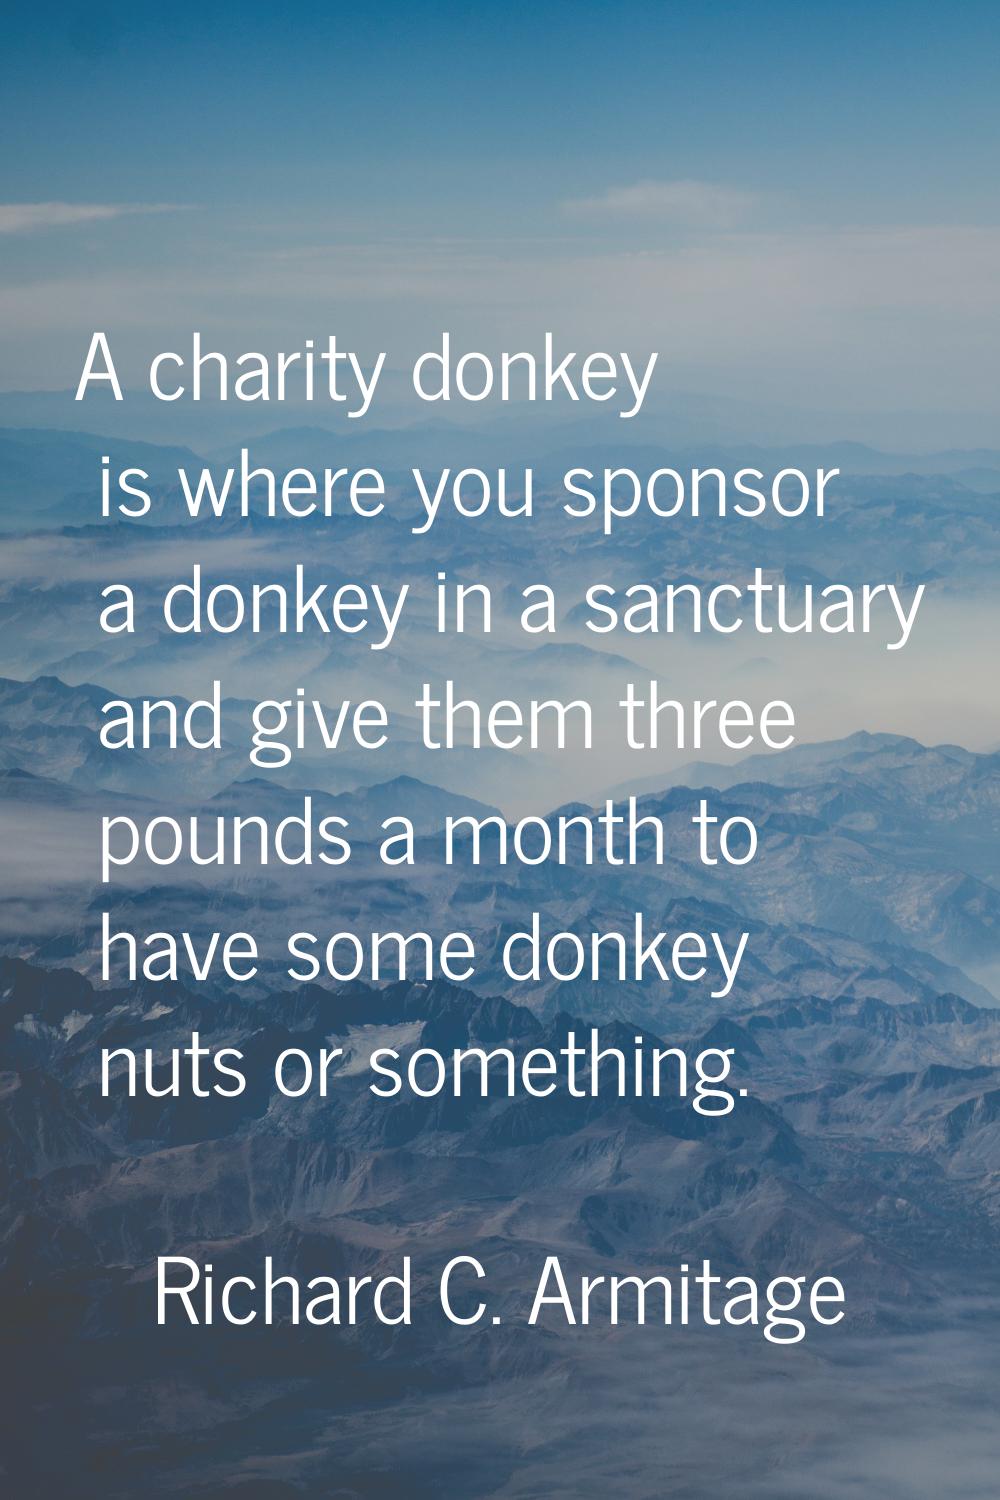 A charity donkey is where you sponsor a donkey in a sanctuary and give them three pounds a month to